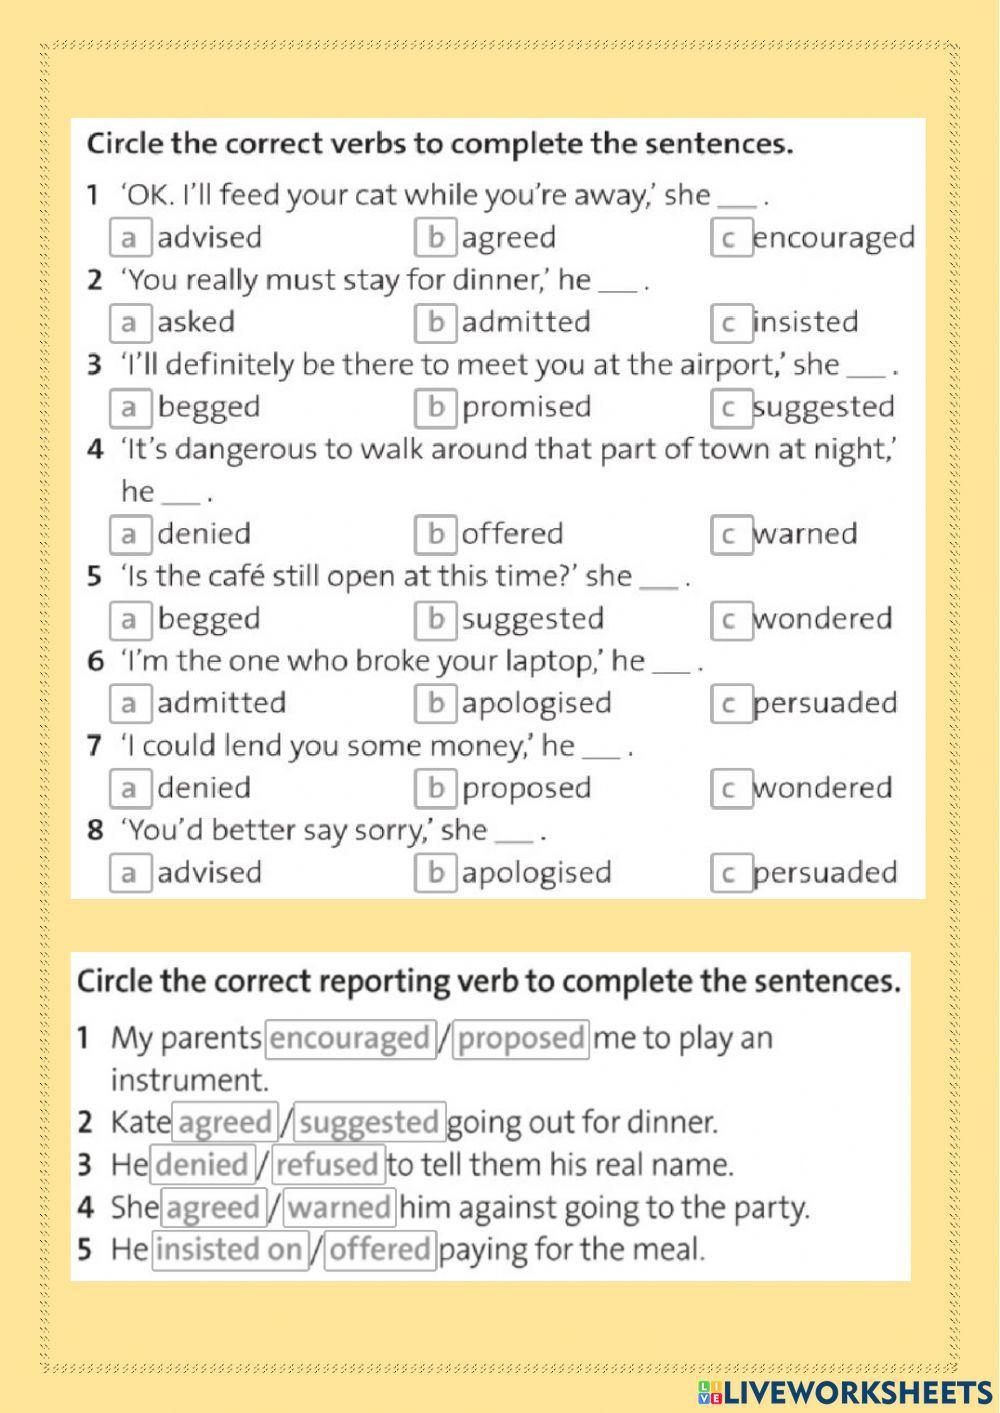 Reporting verbs patterns